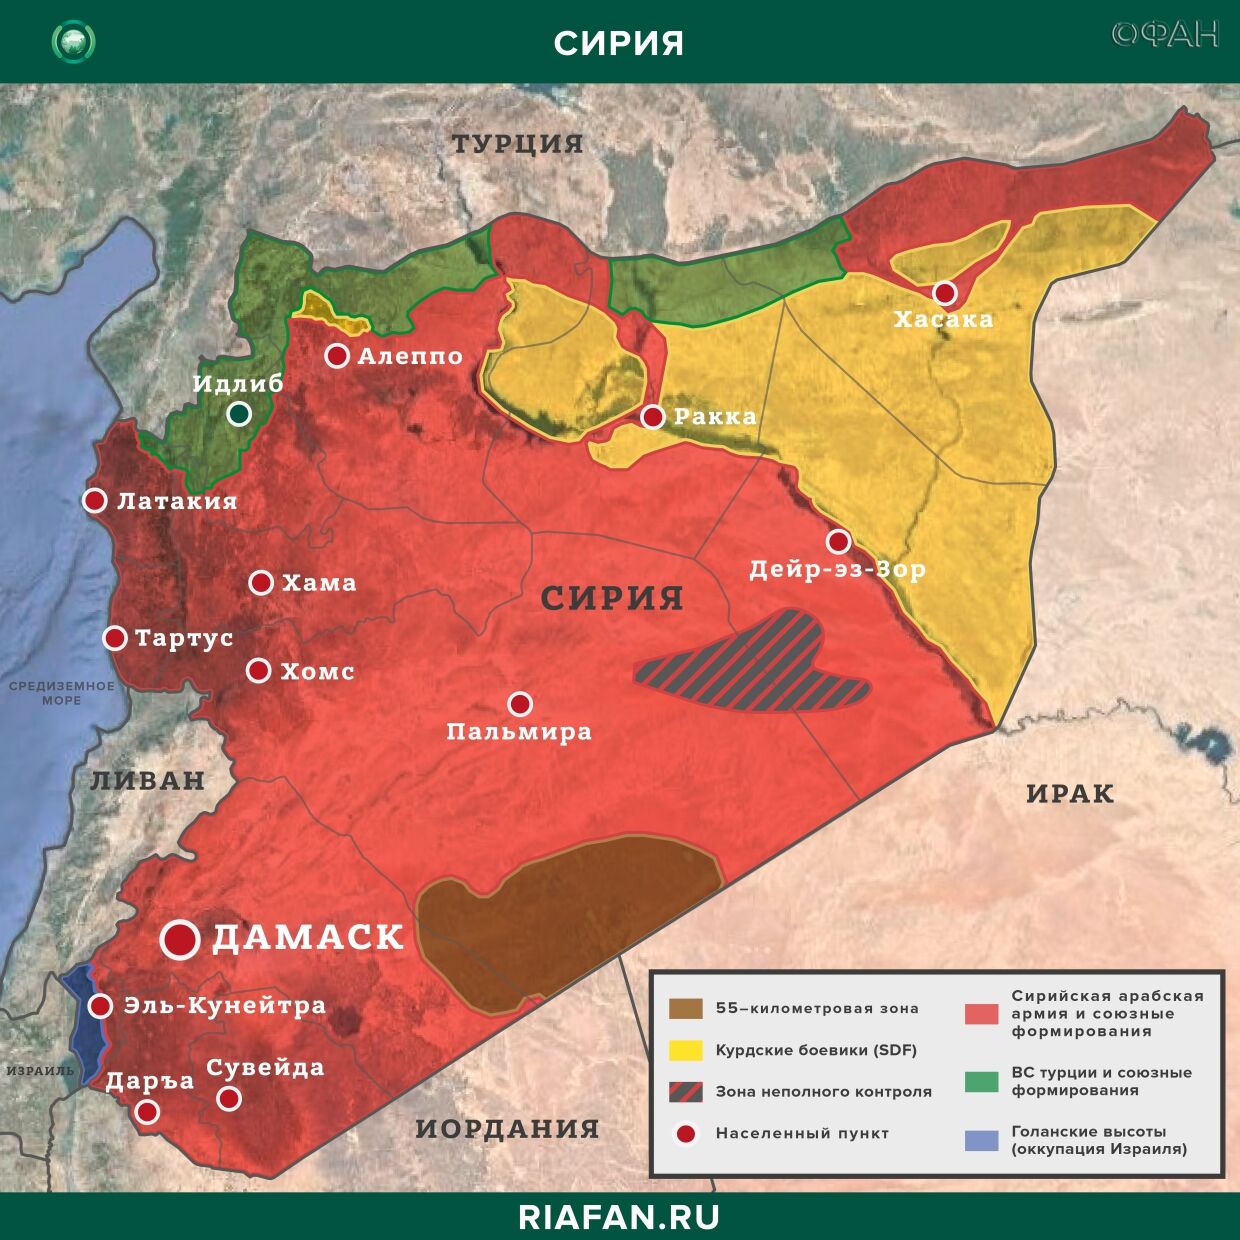 Syria news 27 Martha 22.30: Turkey conducted patrols on the highway M-4, Qamishli residents refused to allow a convoy of US